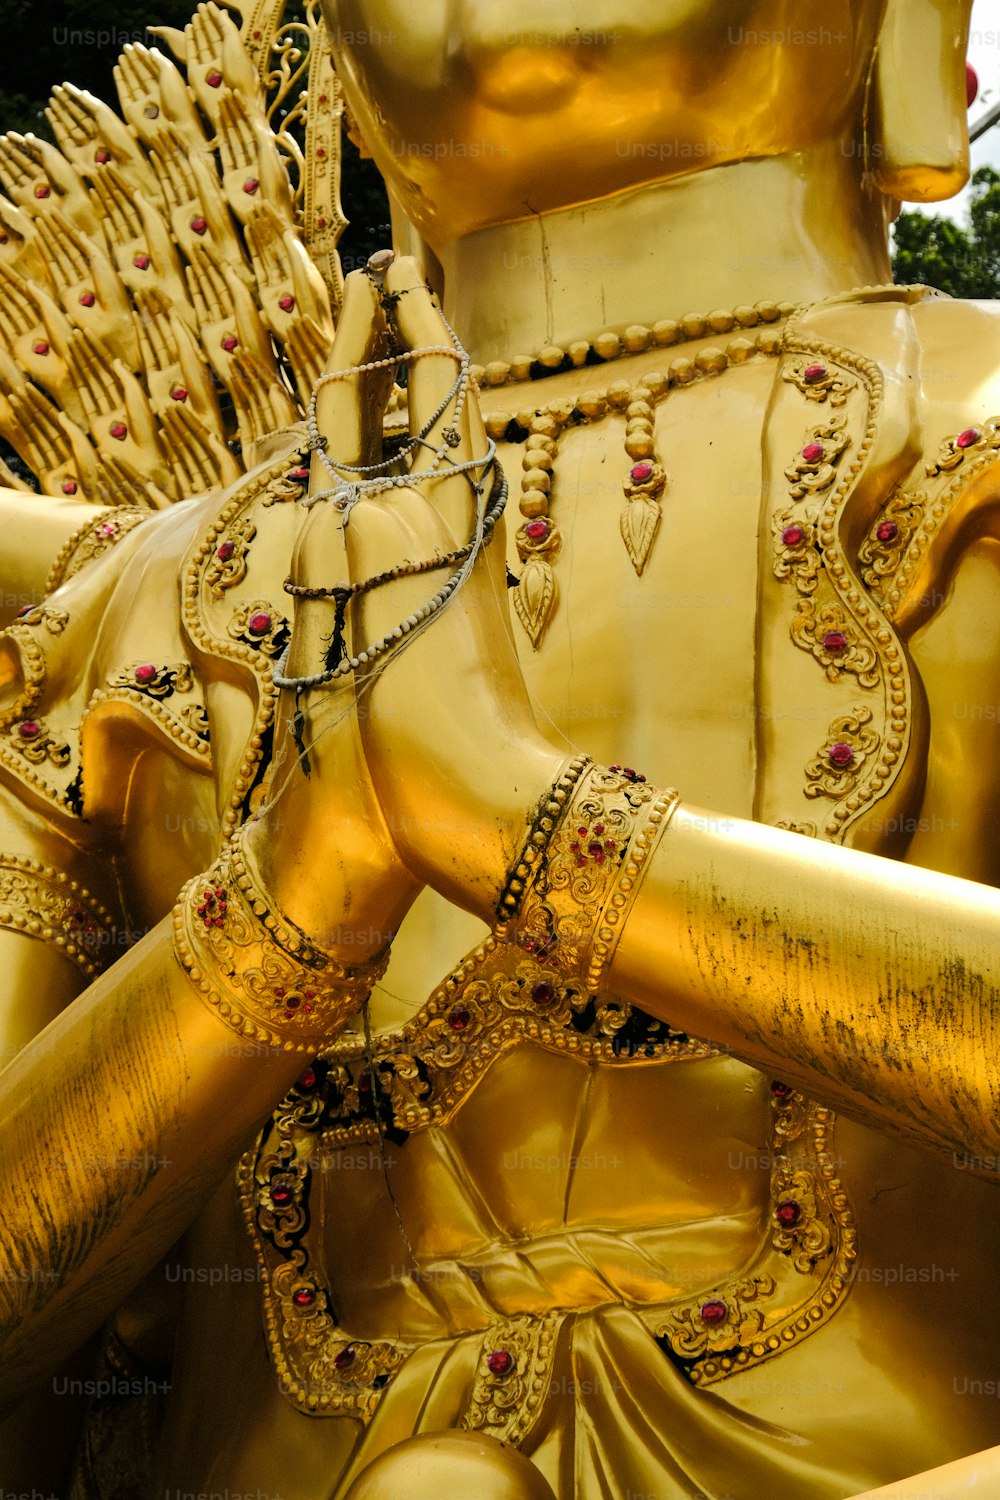 a golden statue of a person holding a sword